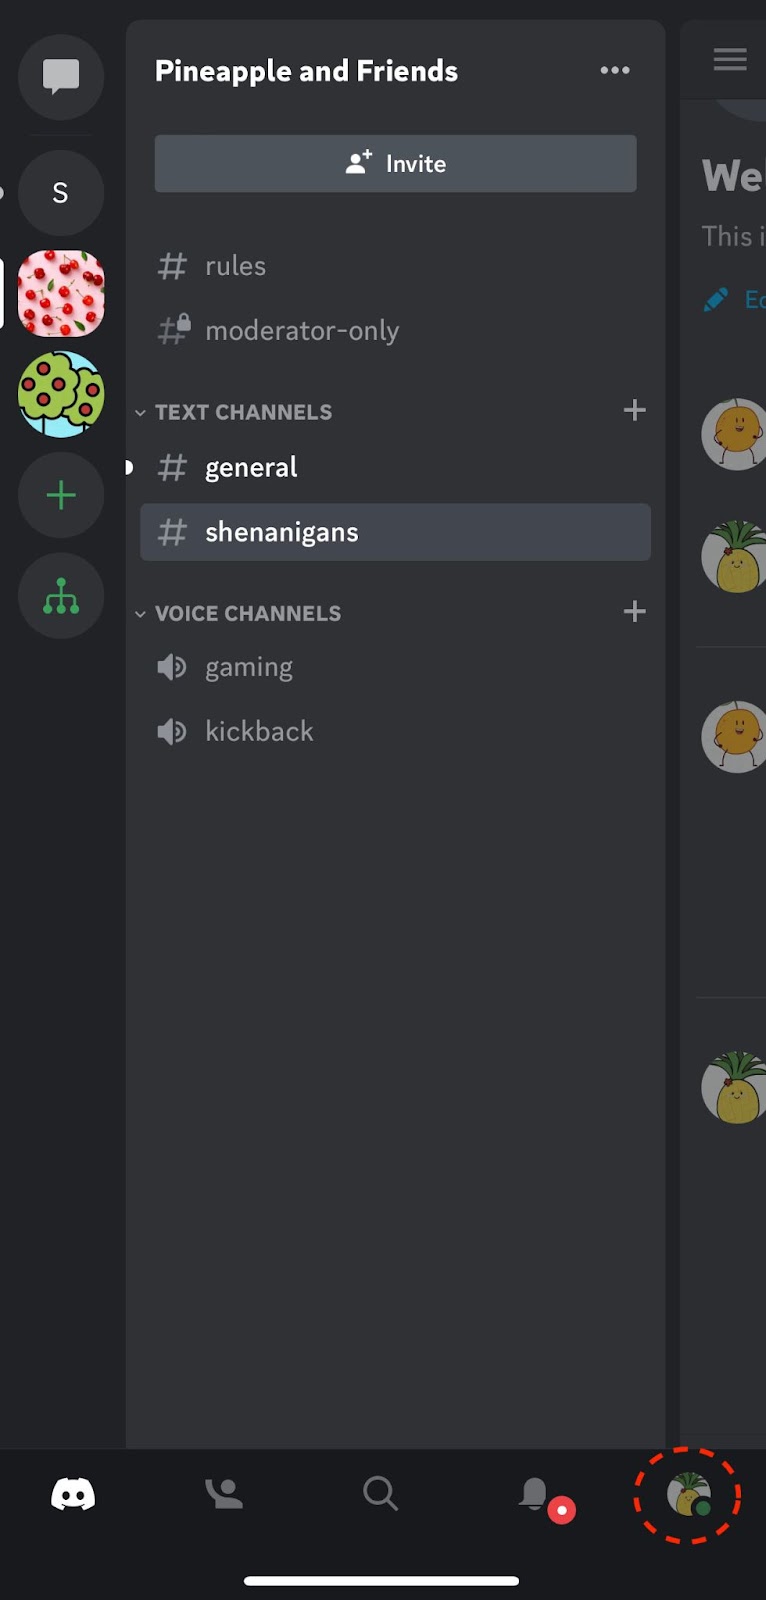 How to Use Discord, the Messaging App for Gamers